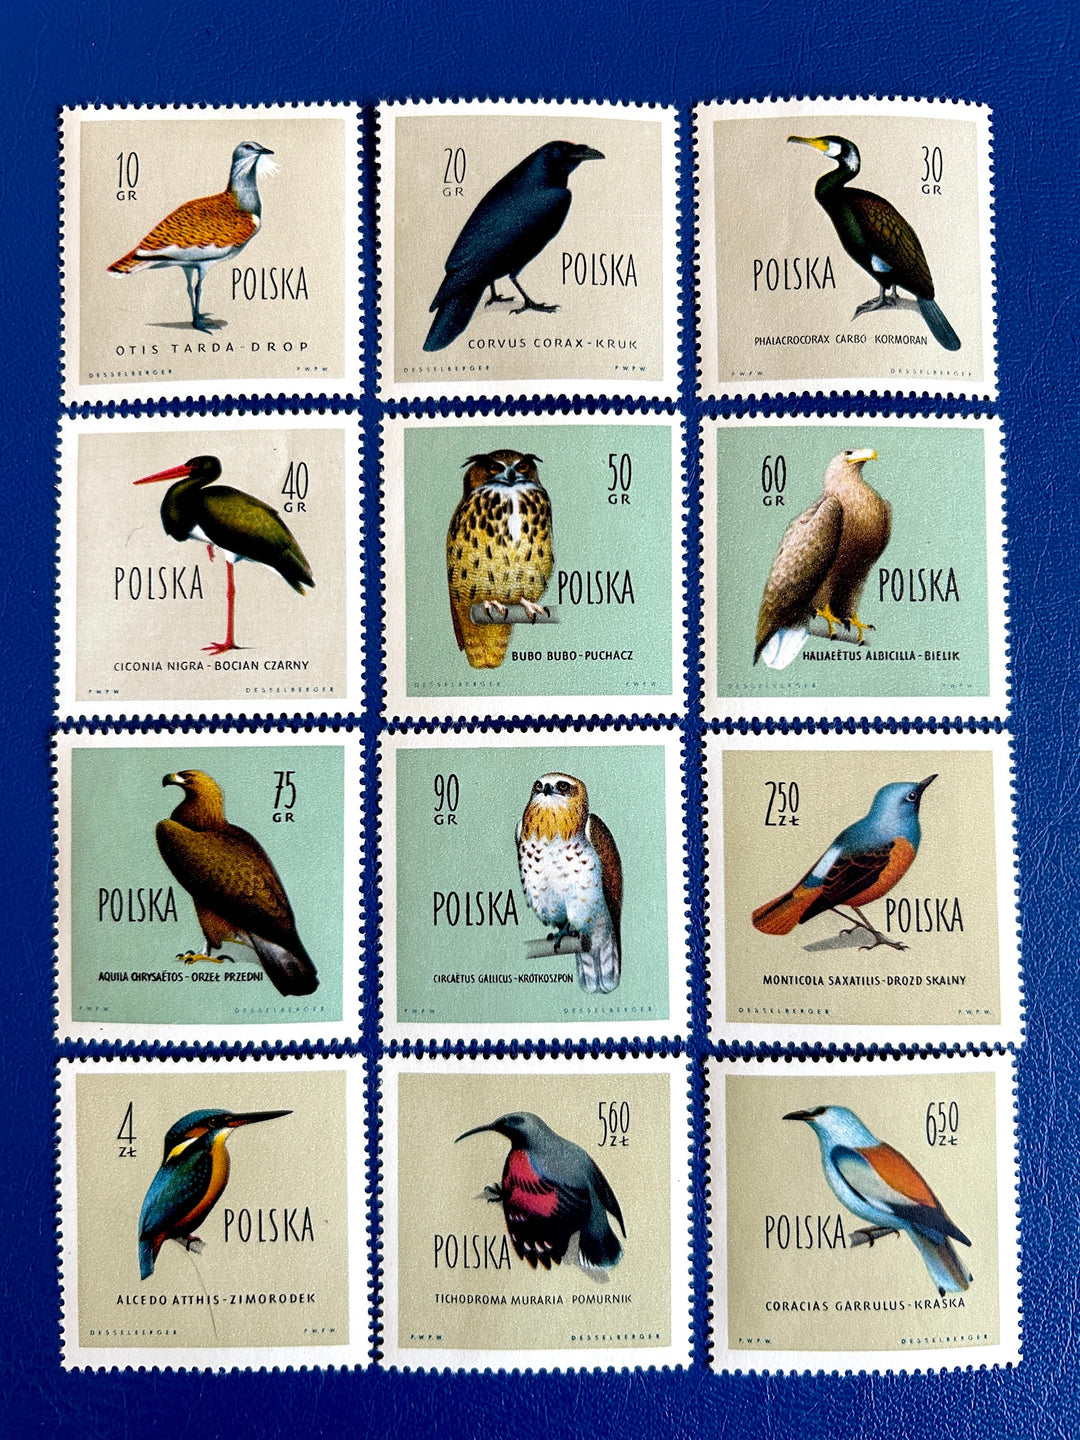 Poland - Original Vintage Postage Stamps - 1960 - Protected Birds - for the collector, artist or crafter